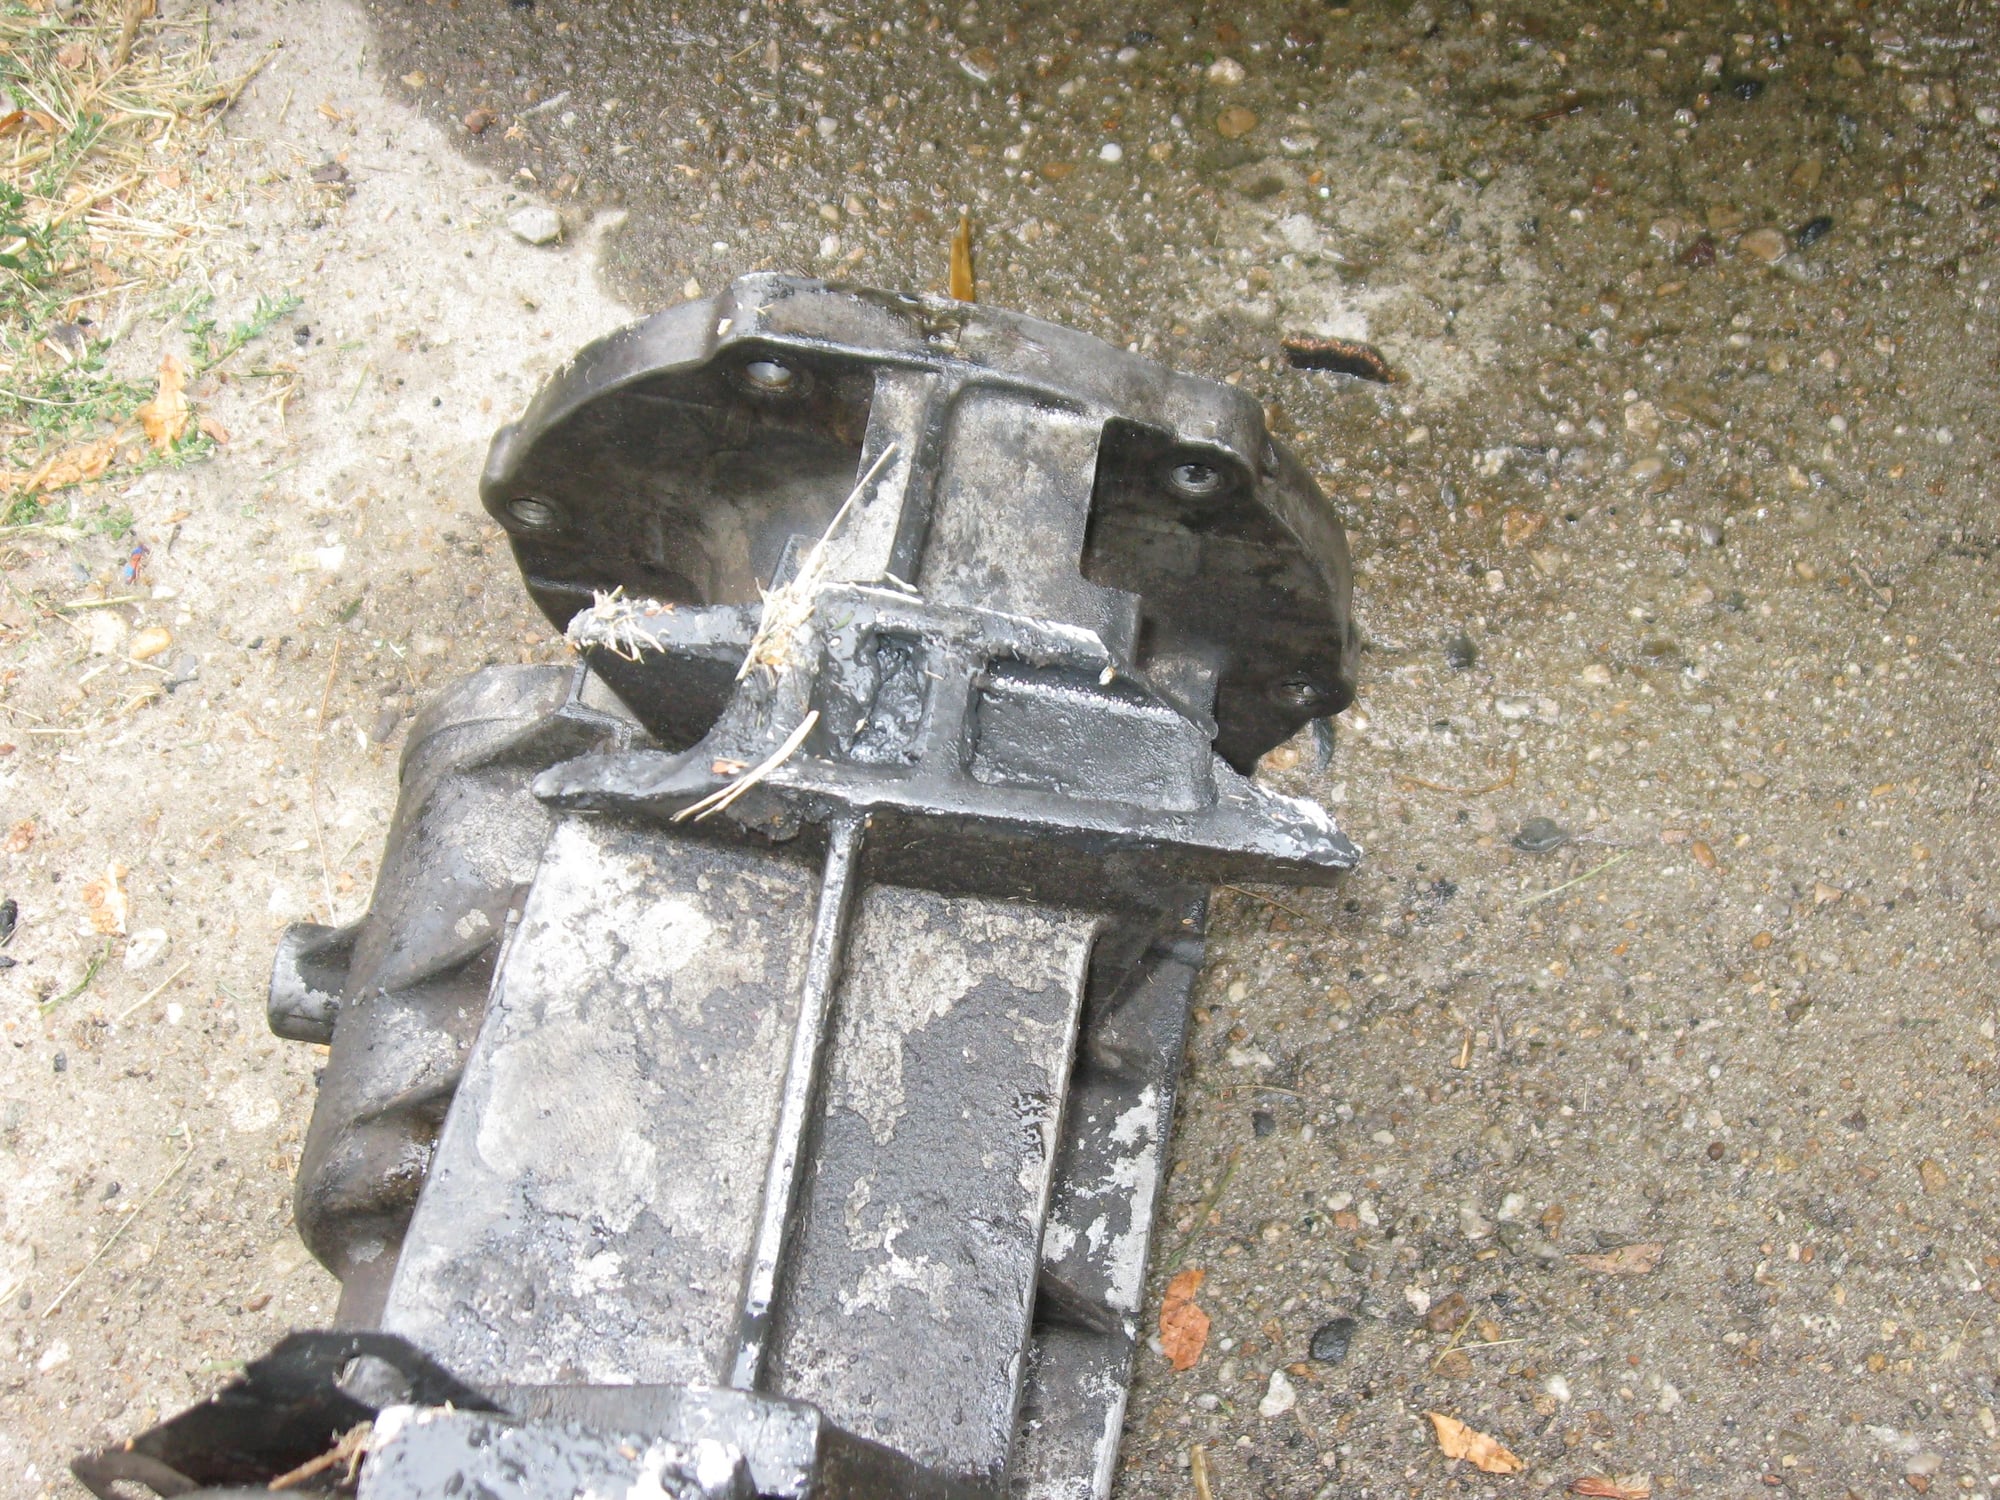 Drivetrain - 4x4 SROD four speed overdrive transmission (rebuilt) - Used - 1978 to 1987 Ford Bronco - 1978 to 1987 Ford F Series - Boise, ID 83709, United States